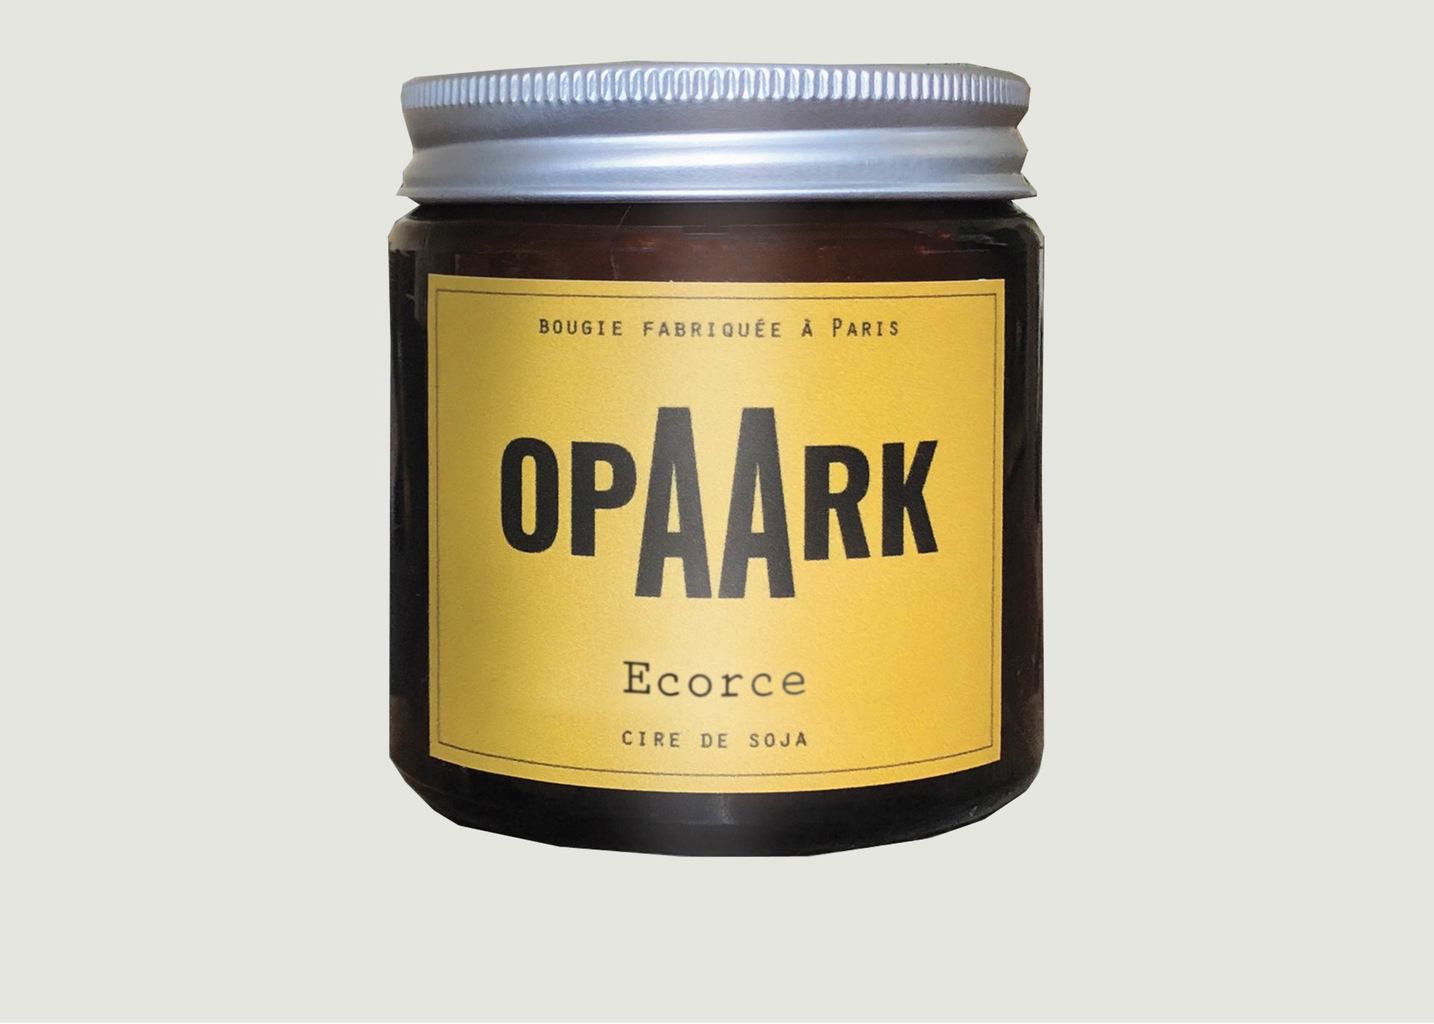 90g Bark Scented Candle - OPAARK